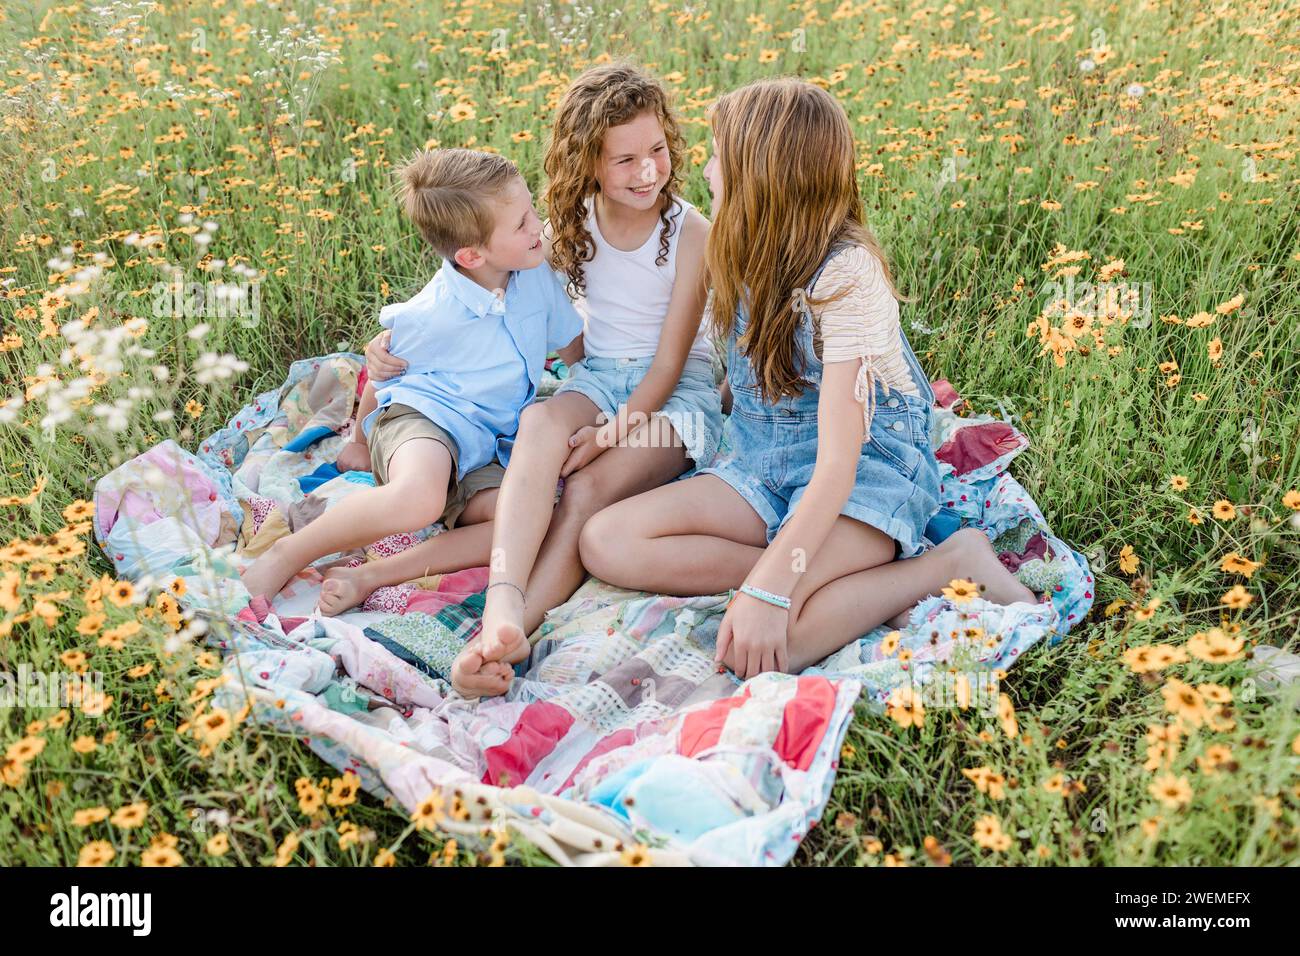 Siblings sitting on a quilt in a flower field on a spring day Stock Photo